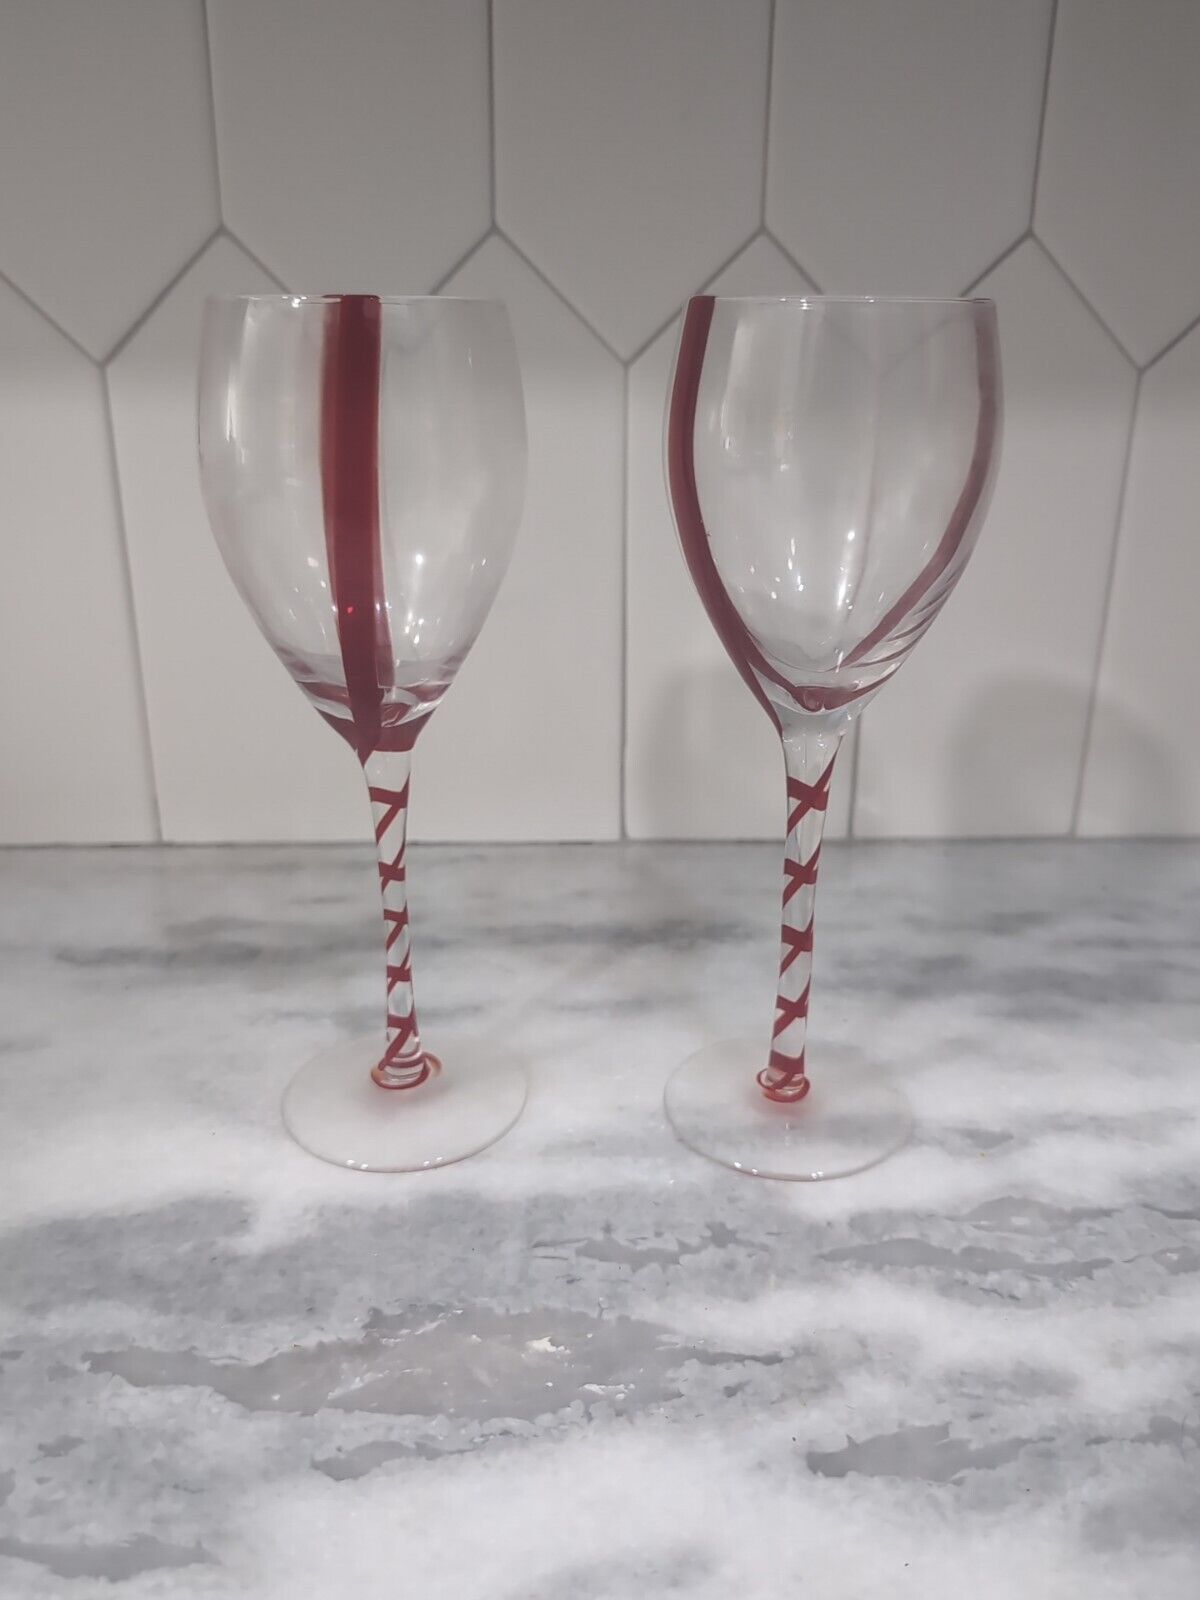 Pier 1 Imports Red Double Stripe Wine Glasses 12oz Set Of 2 Excellent